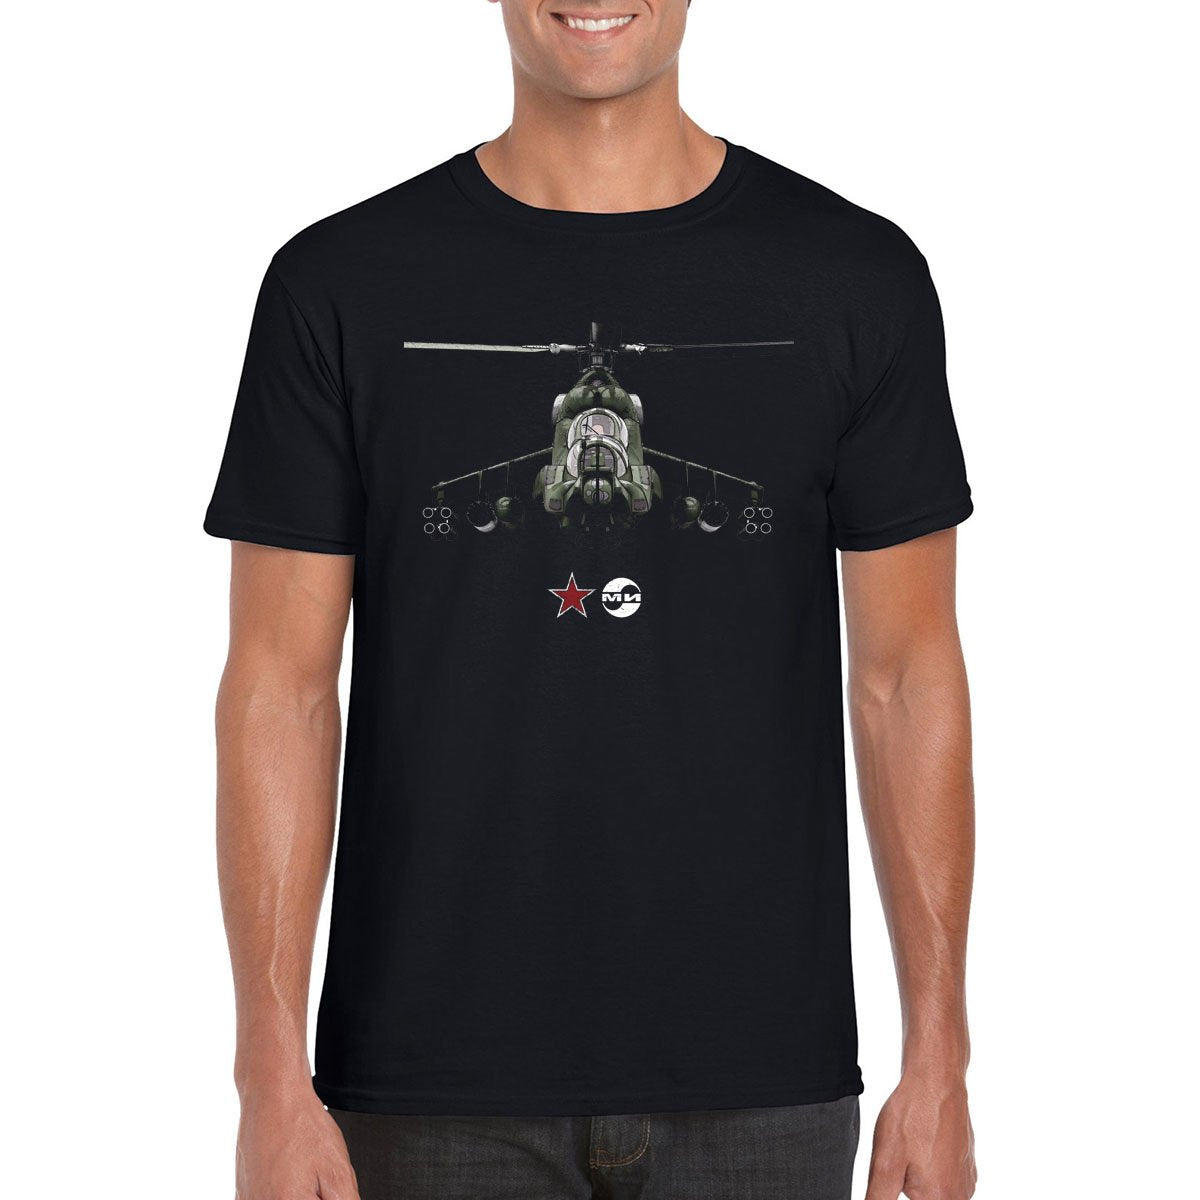 HIND Helicopter T-Shirt